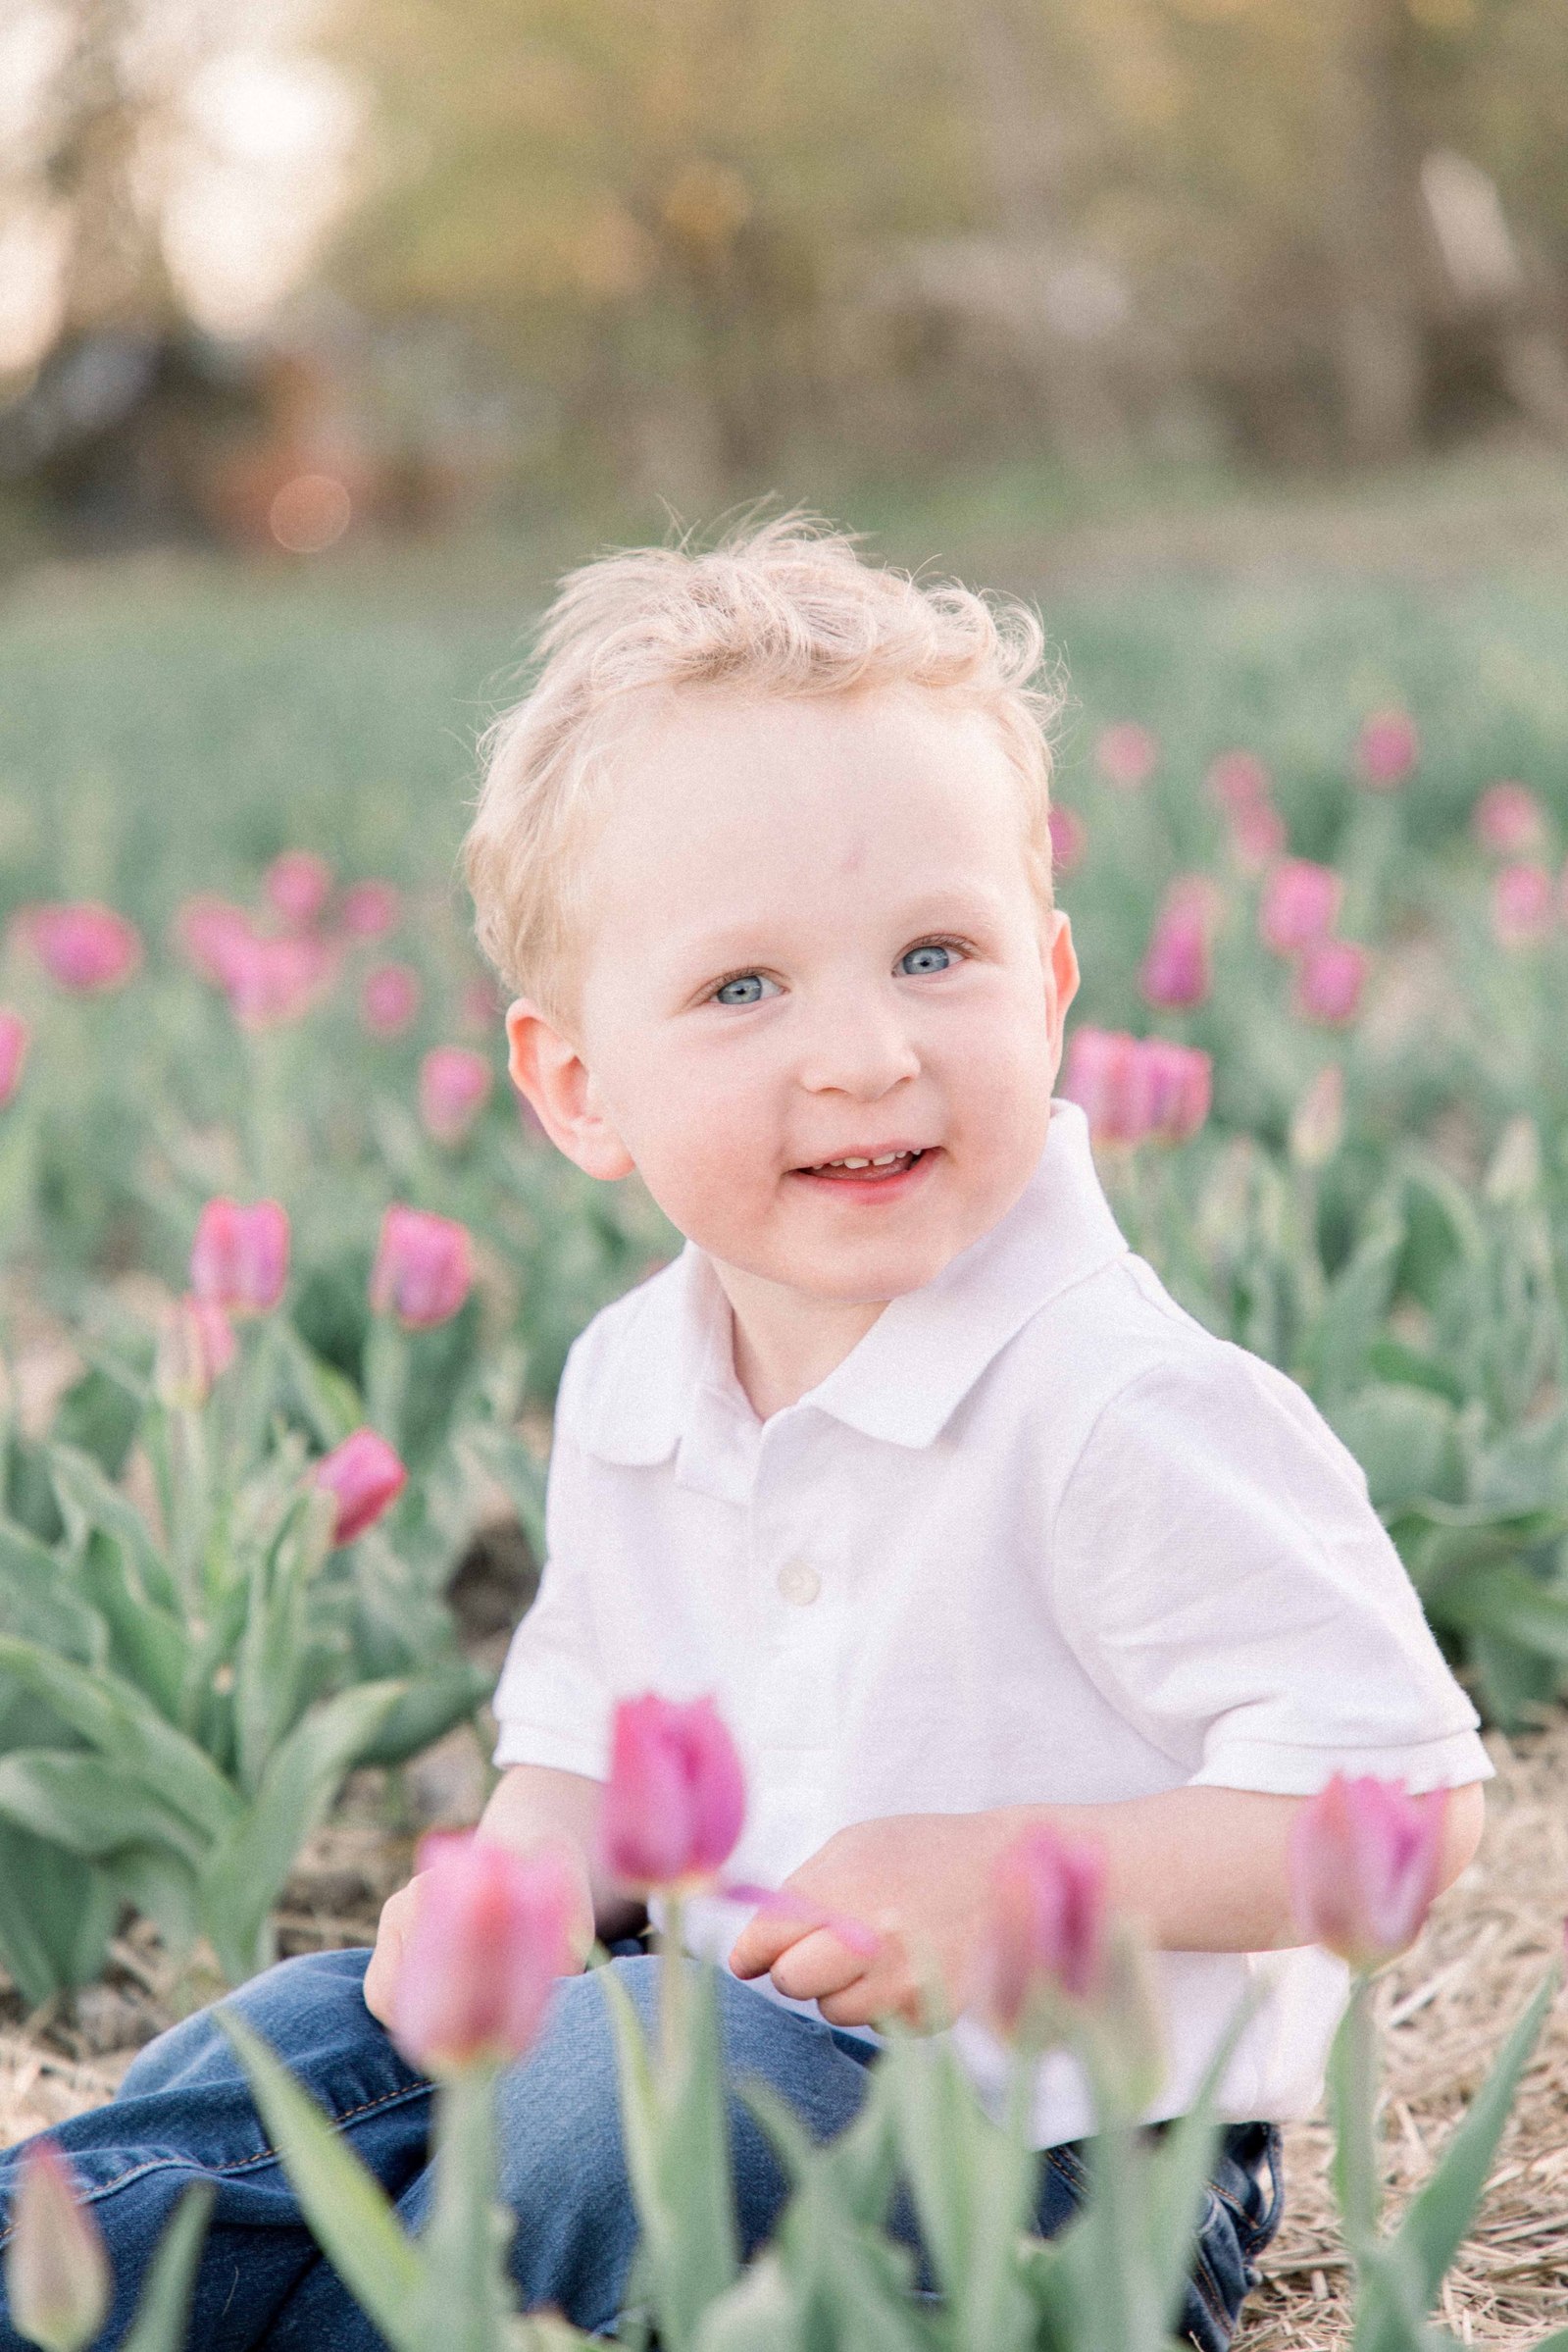 Portrait of a young boy sitting in a tulip field, looking at the camera and smiling. Vankleek Hill Portrait Photographer, L'Orignal, Champlain, Prescott-Russell, Family Photography, Candid Photography, Emily VanderBeek Photography.